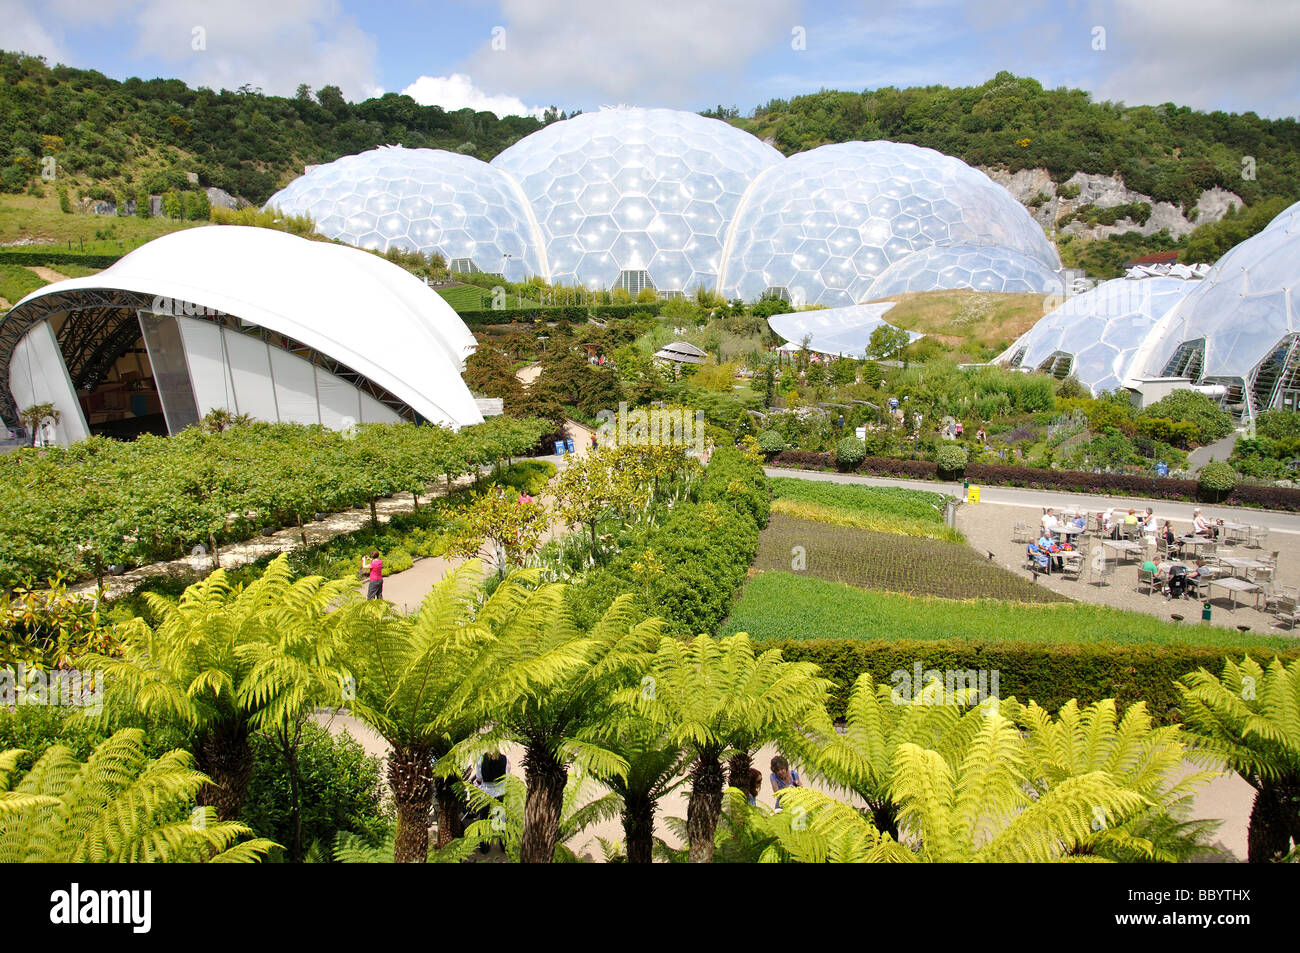 Eden Project, Bodelva, St Austell, Cornwall, Angleterre, Royaume-Uni Banque D'Images